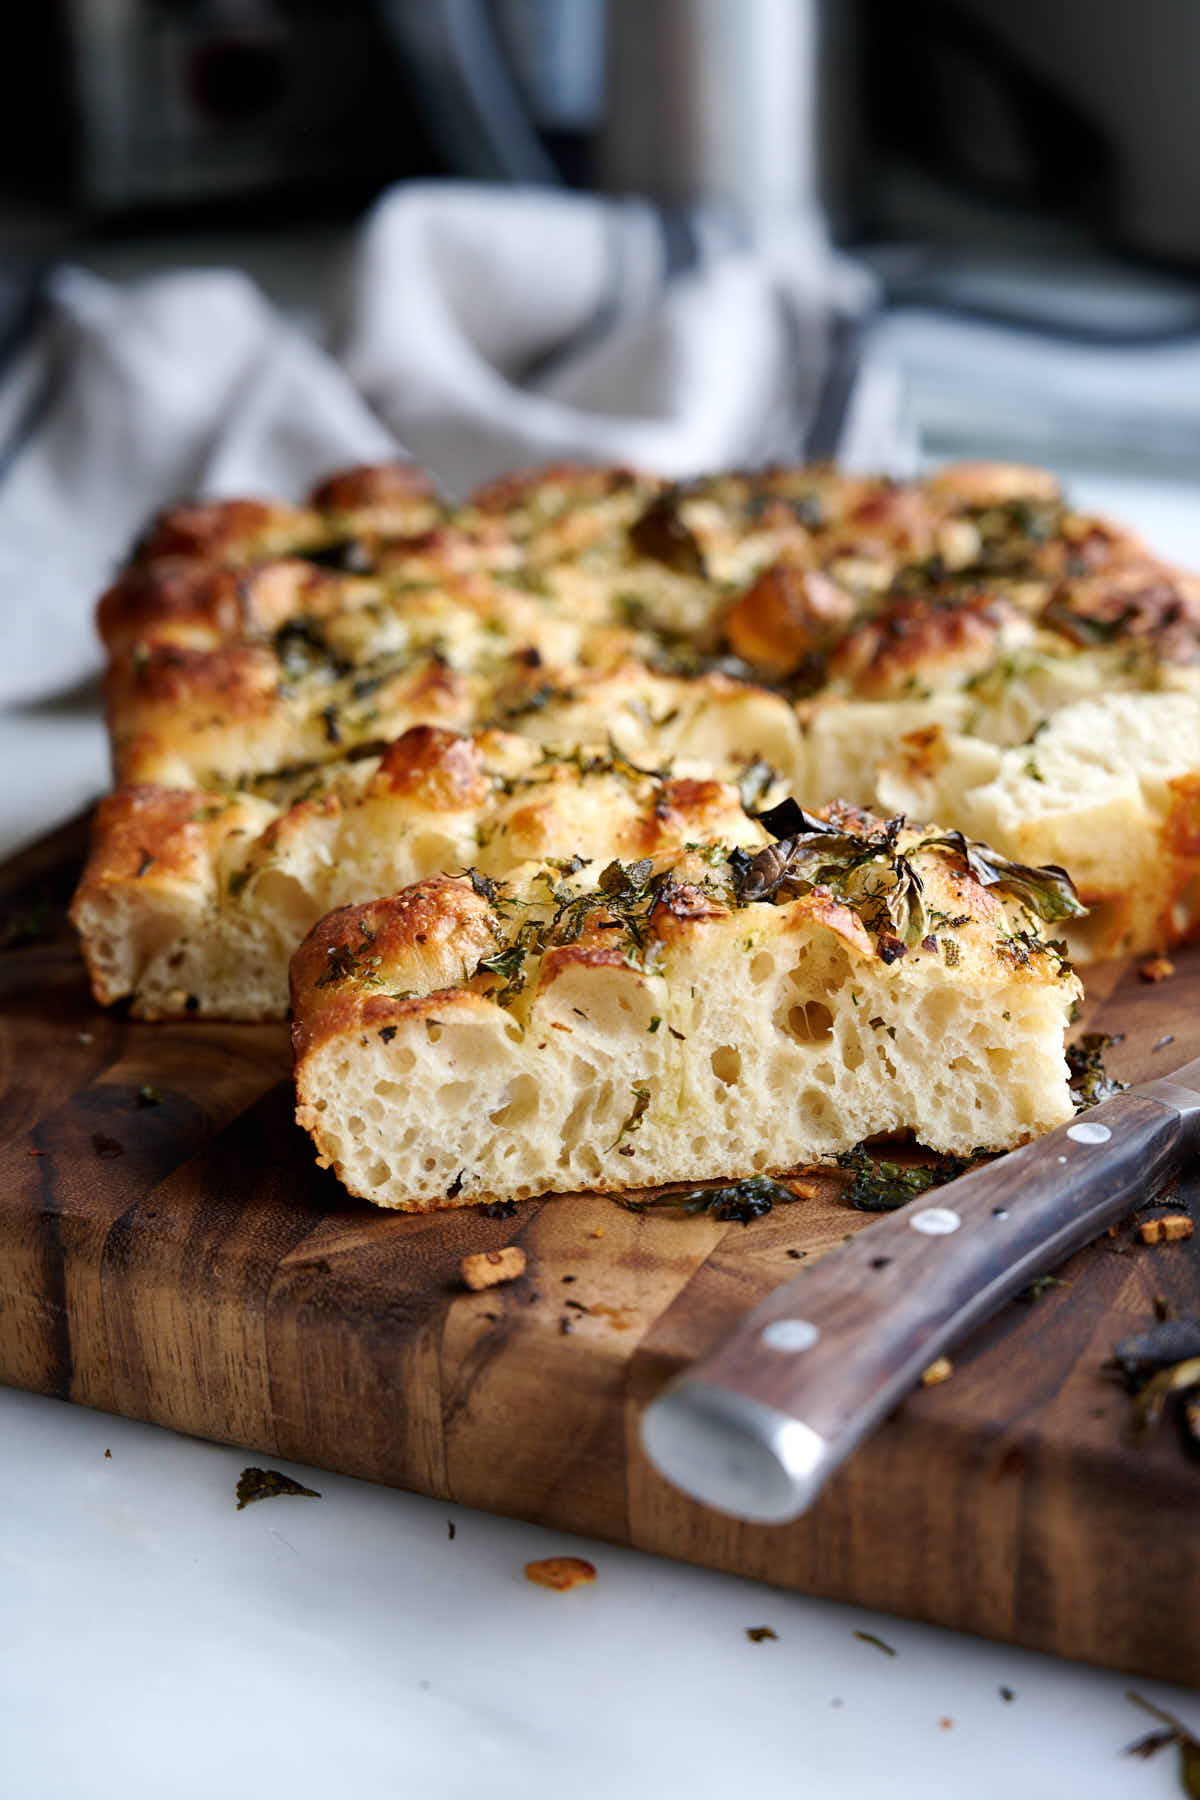 I could eat this focaccia bread every day if I could. There are many homemade focaccia recipes out there, but this one is special. The secret is in high hydration dough, no kneading, overnight fermentation in the fridge to develop robust flavor and a quick bake at high temperature to get a thin crispy crust and moist, airy crumb. You must try this focaccia recipe, with its simple yet very flavorful toppings, you will love it.